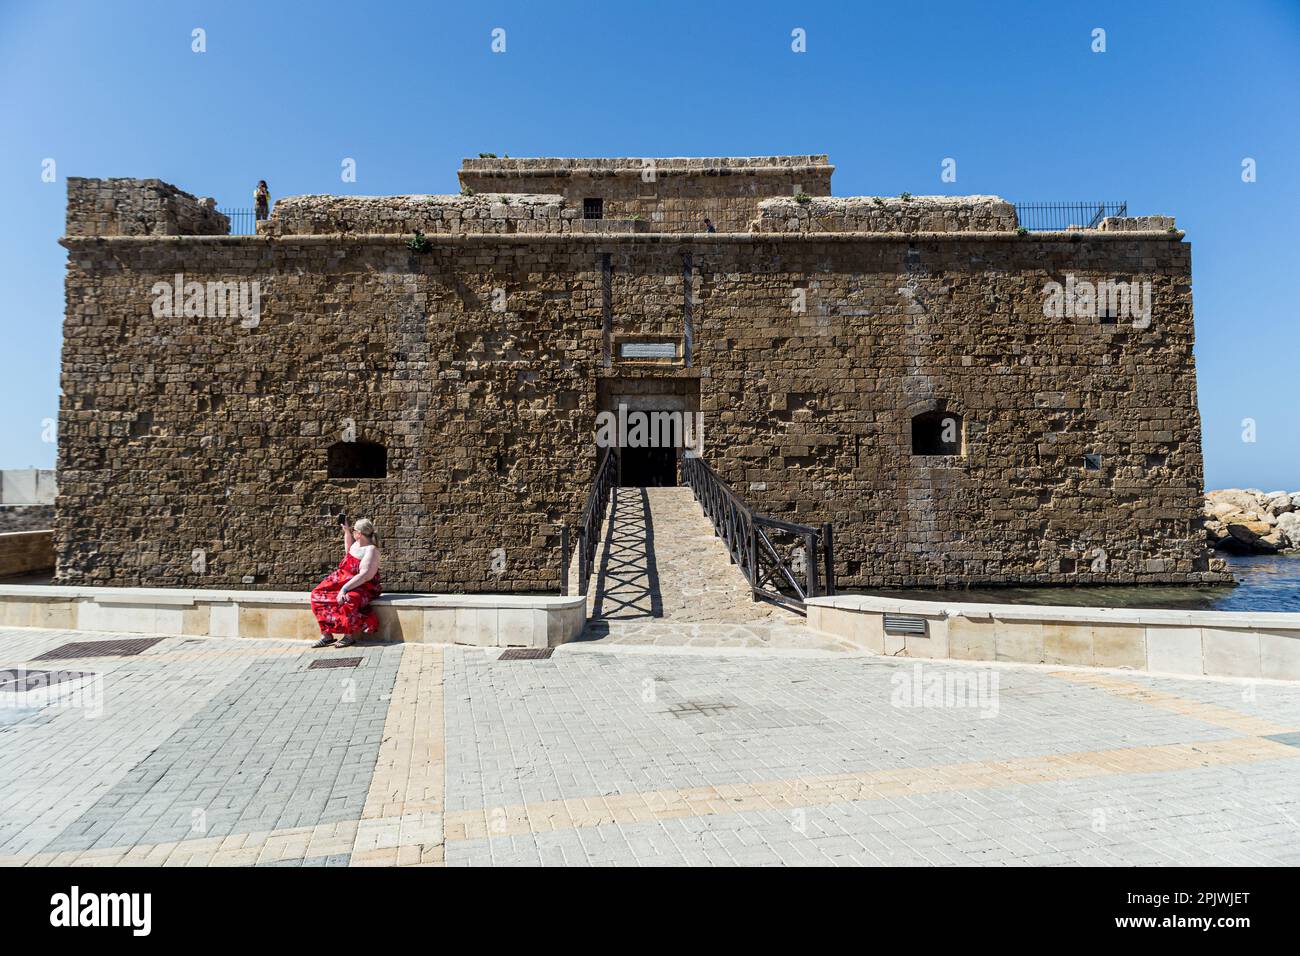 April 4, 2023, Paphos, Paphos, Cyprus: A tourist captures the area with her cell phone in front of the old castle in Paphos. Cyprus sees massive increase in tourist arrivals in February with UK topping the list. Tourist arrivals in Cyprus increased by 65.6% year-on-year in February 2023. This fact, combined with the facts that Cyprus welcomed 3.2 million tourists last year, despite the absence of 800,000 Russian and Ukrainian tourists because of the war and that for 2022 it is estimated that tourists' spending has increased by about 13% on average for each trip, makes 2023 seem very promising. Stock Photo